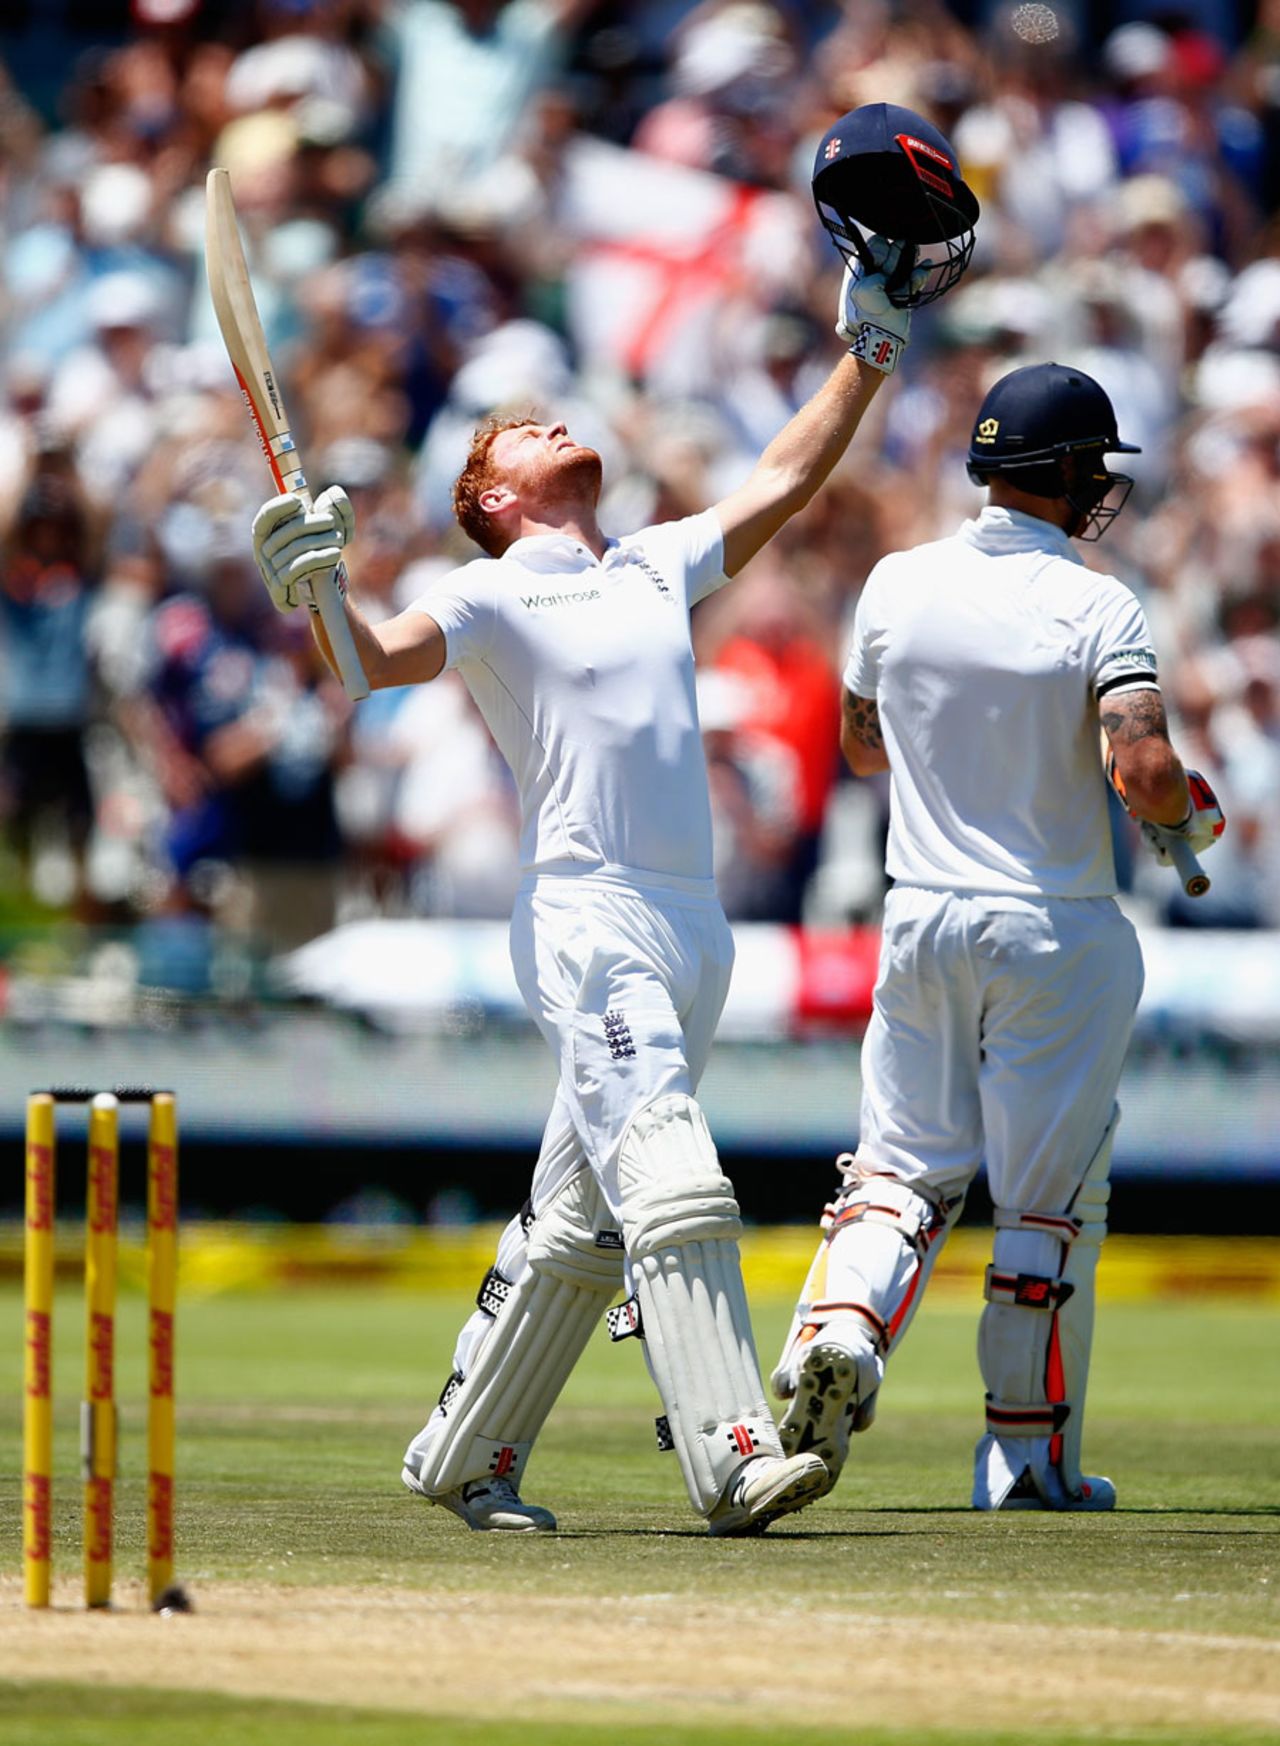 Jonny Bairstow celebrates his maiden Test century on the second afternoon at Newlands, South Africa v England, 2nd Test, Cape Town, 2nd day, January 3, 2016